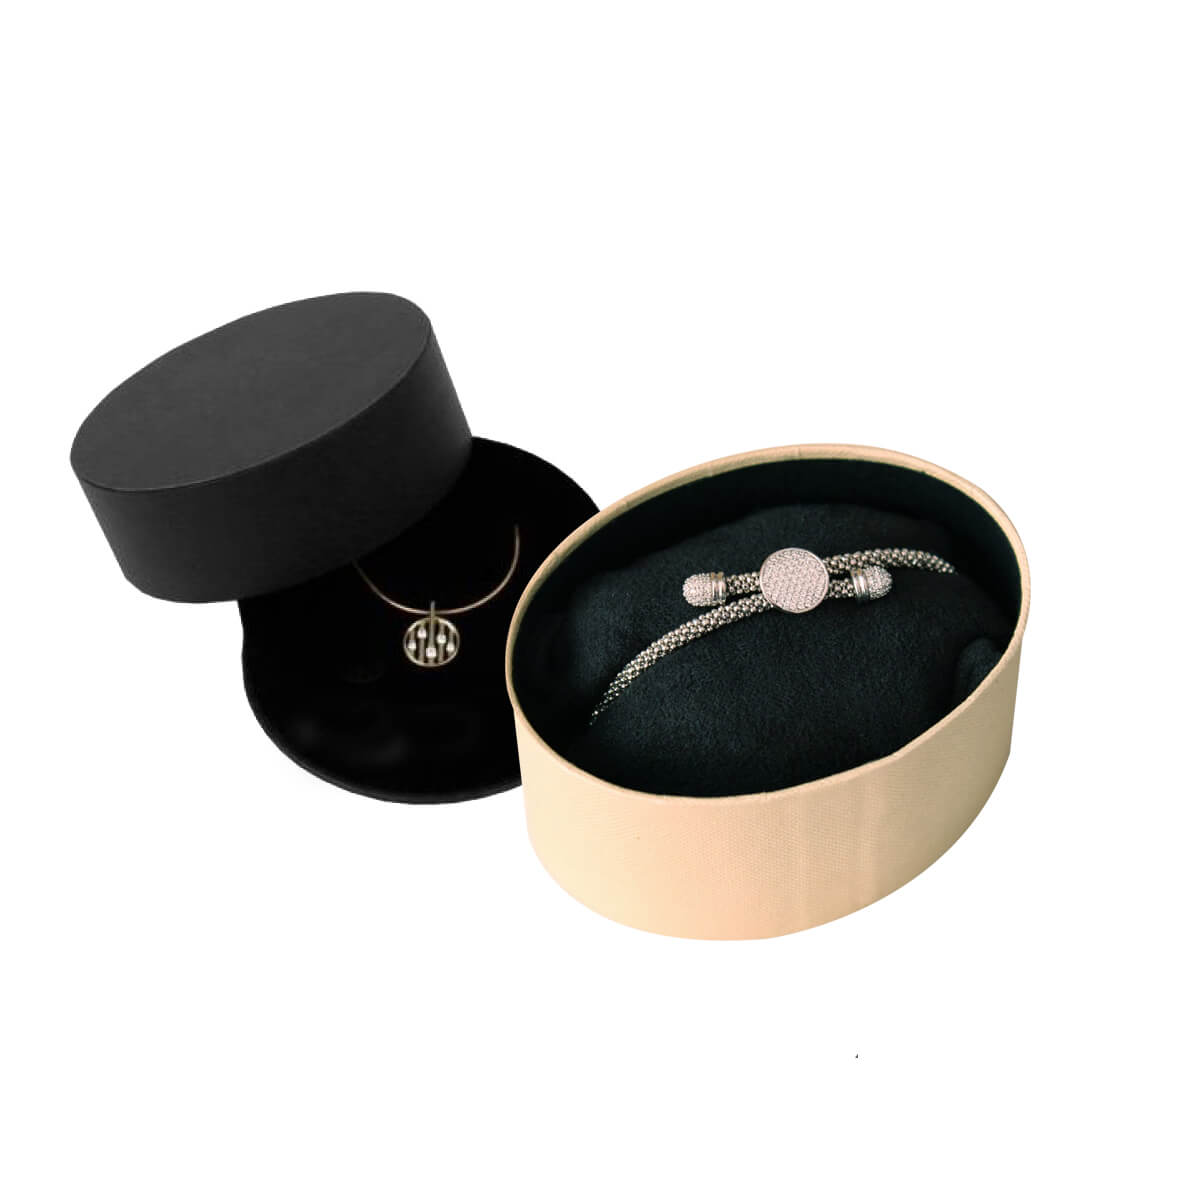 Quality Luxury Padded Cufflinks Gift Boxes Choose 1-100 Wholesale Prices!